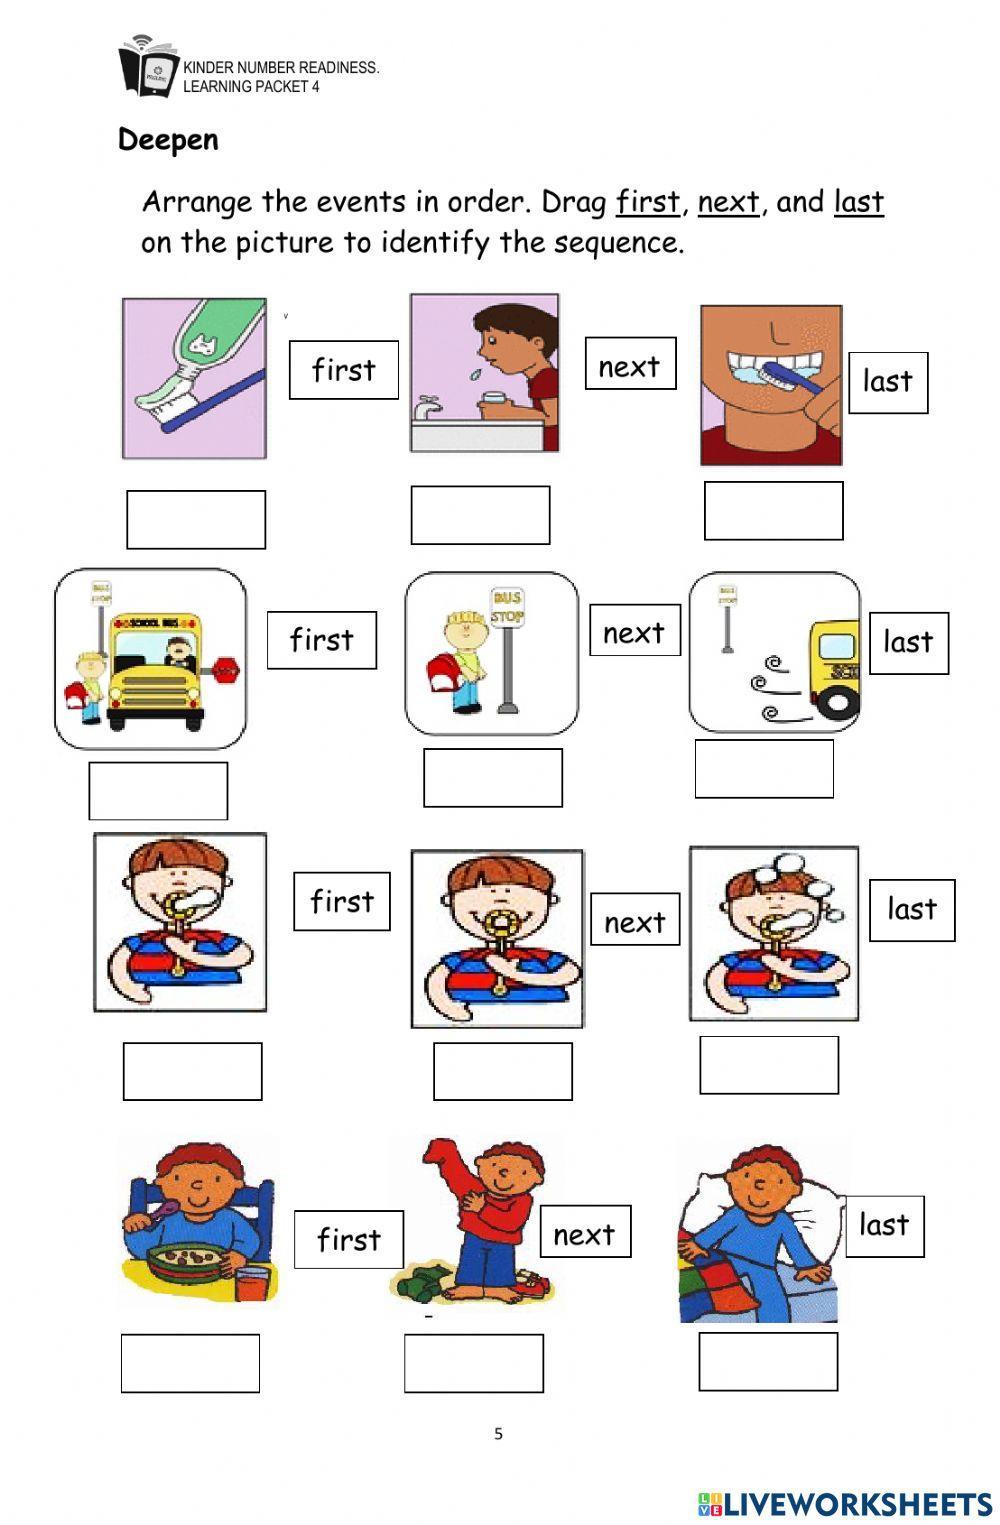 Sequencing Events